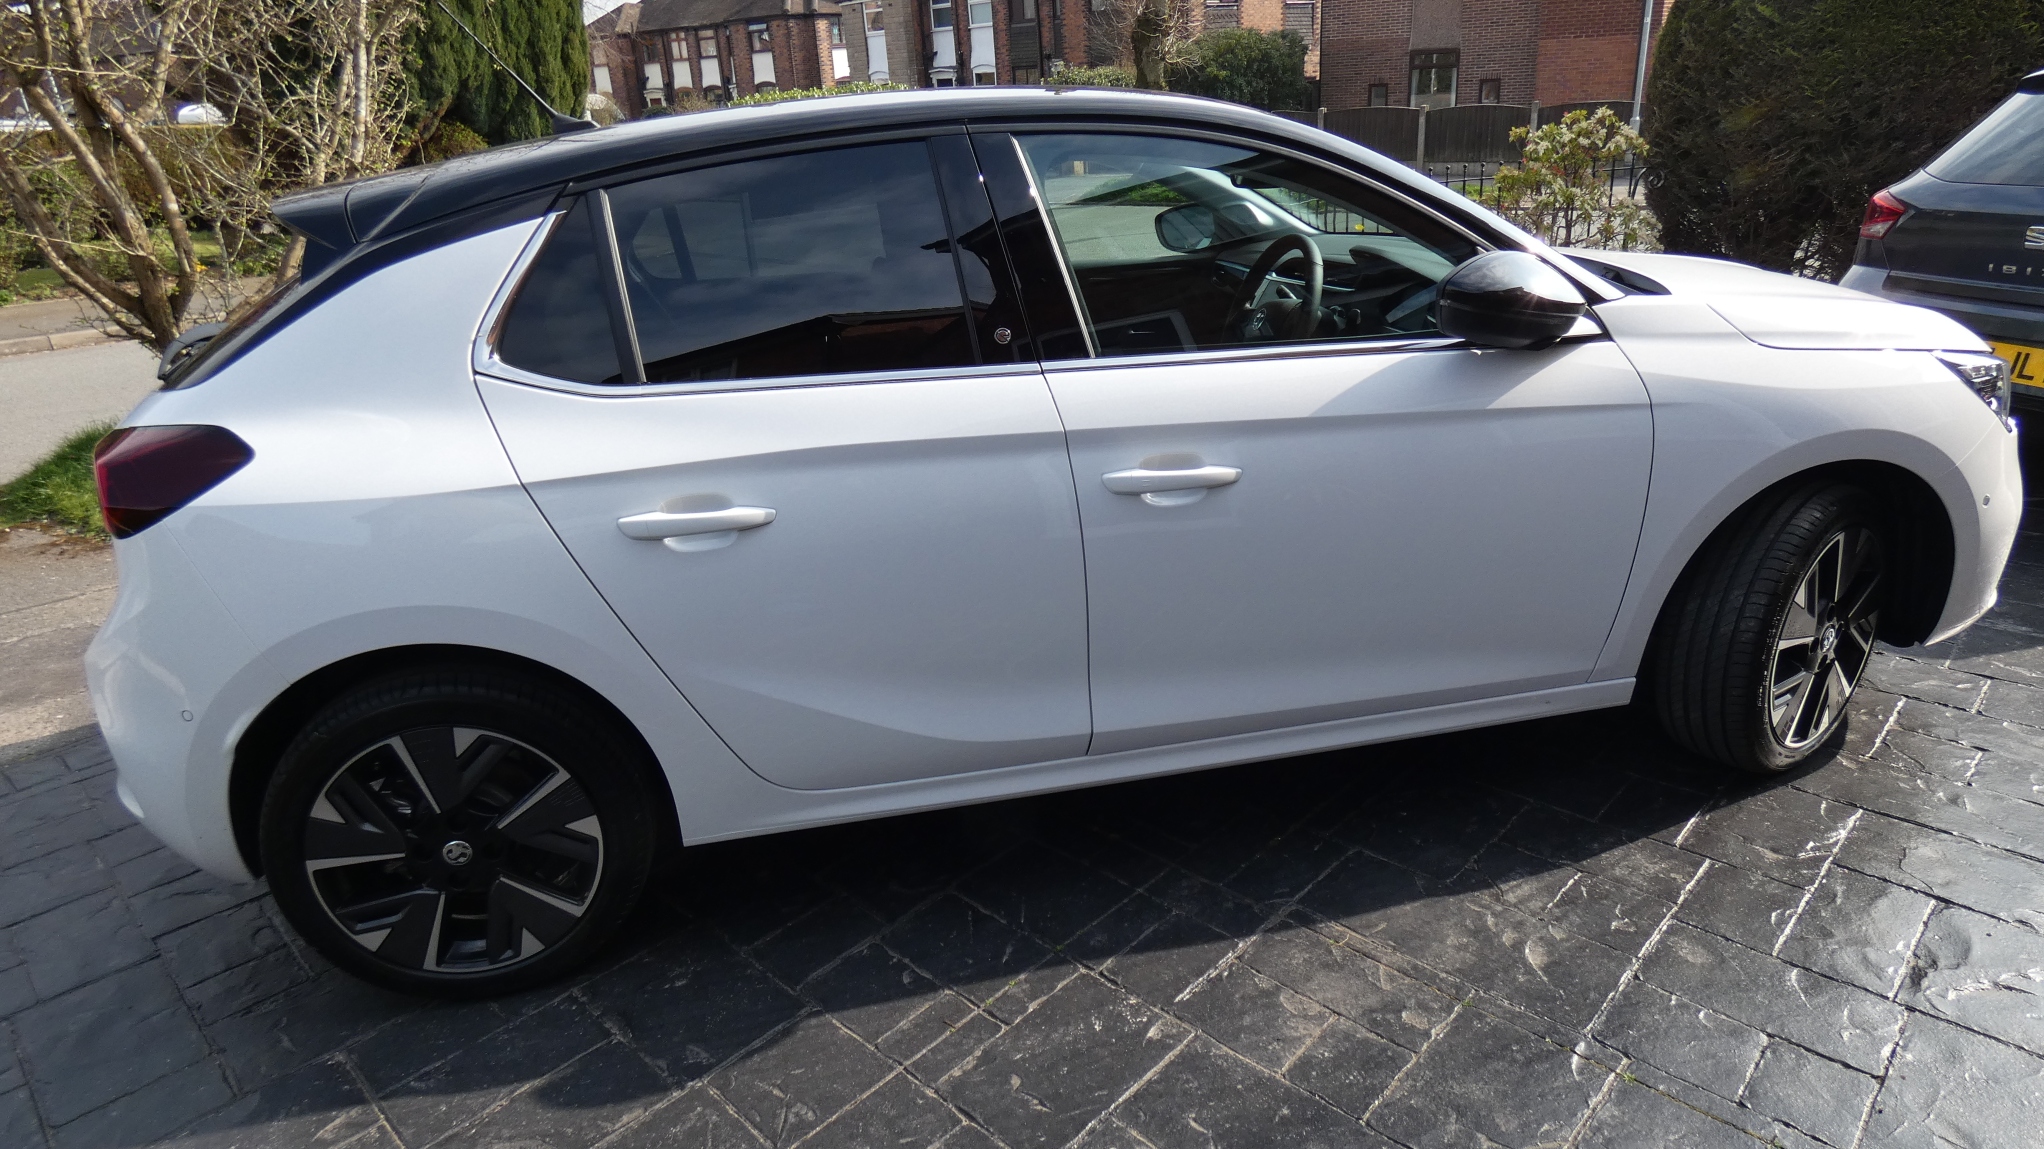 Vauxhall Corsa-e 2022 electric car owner review